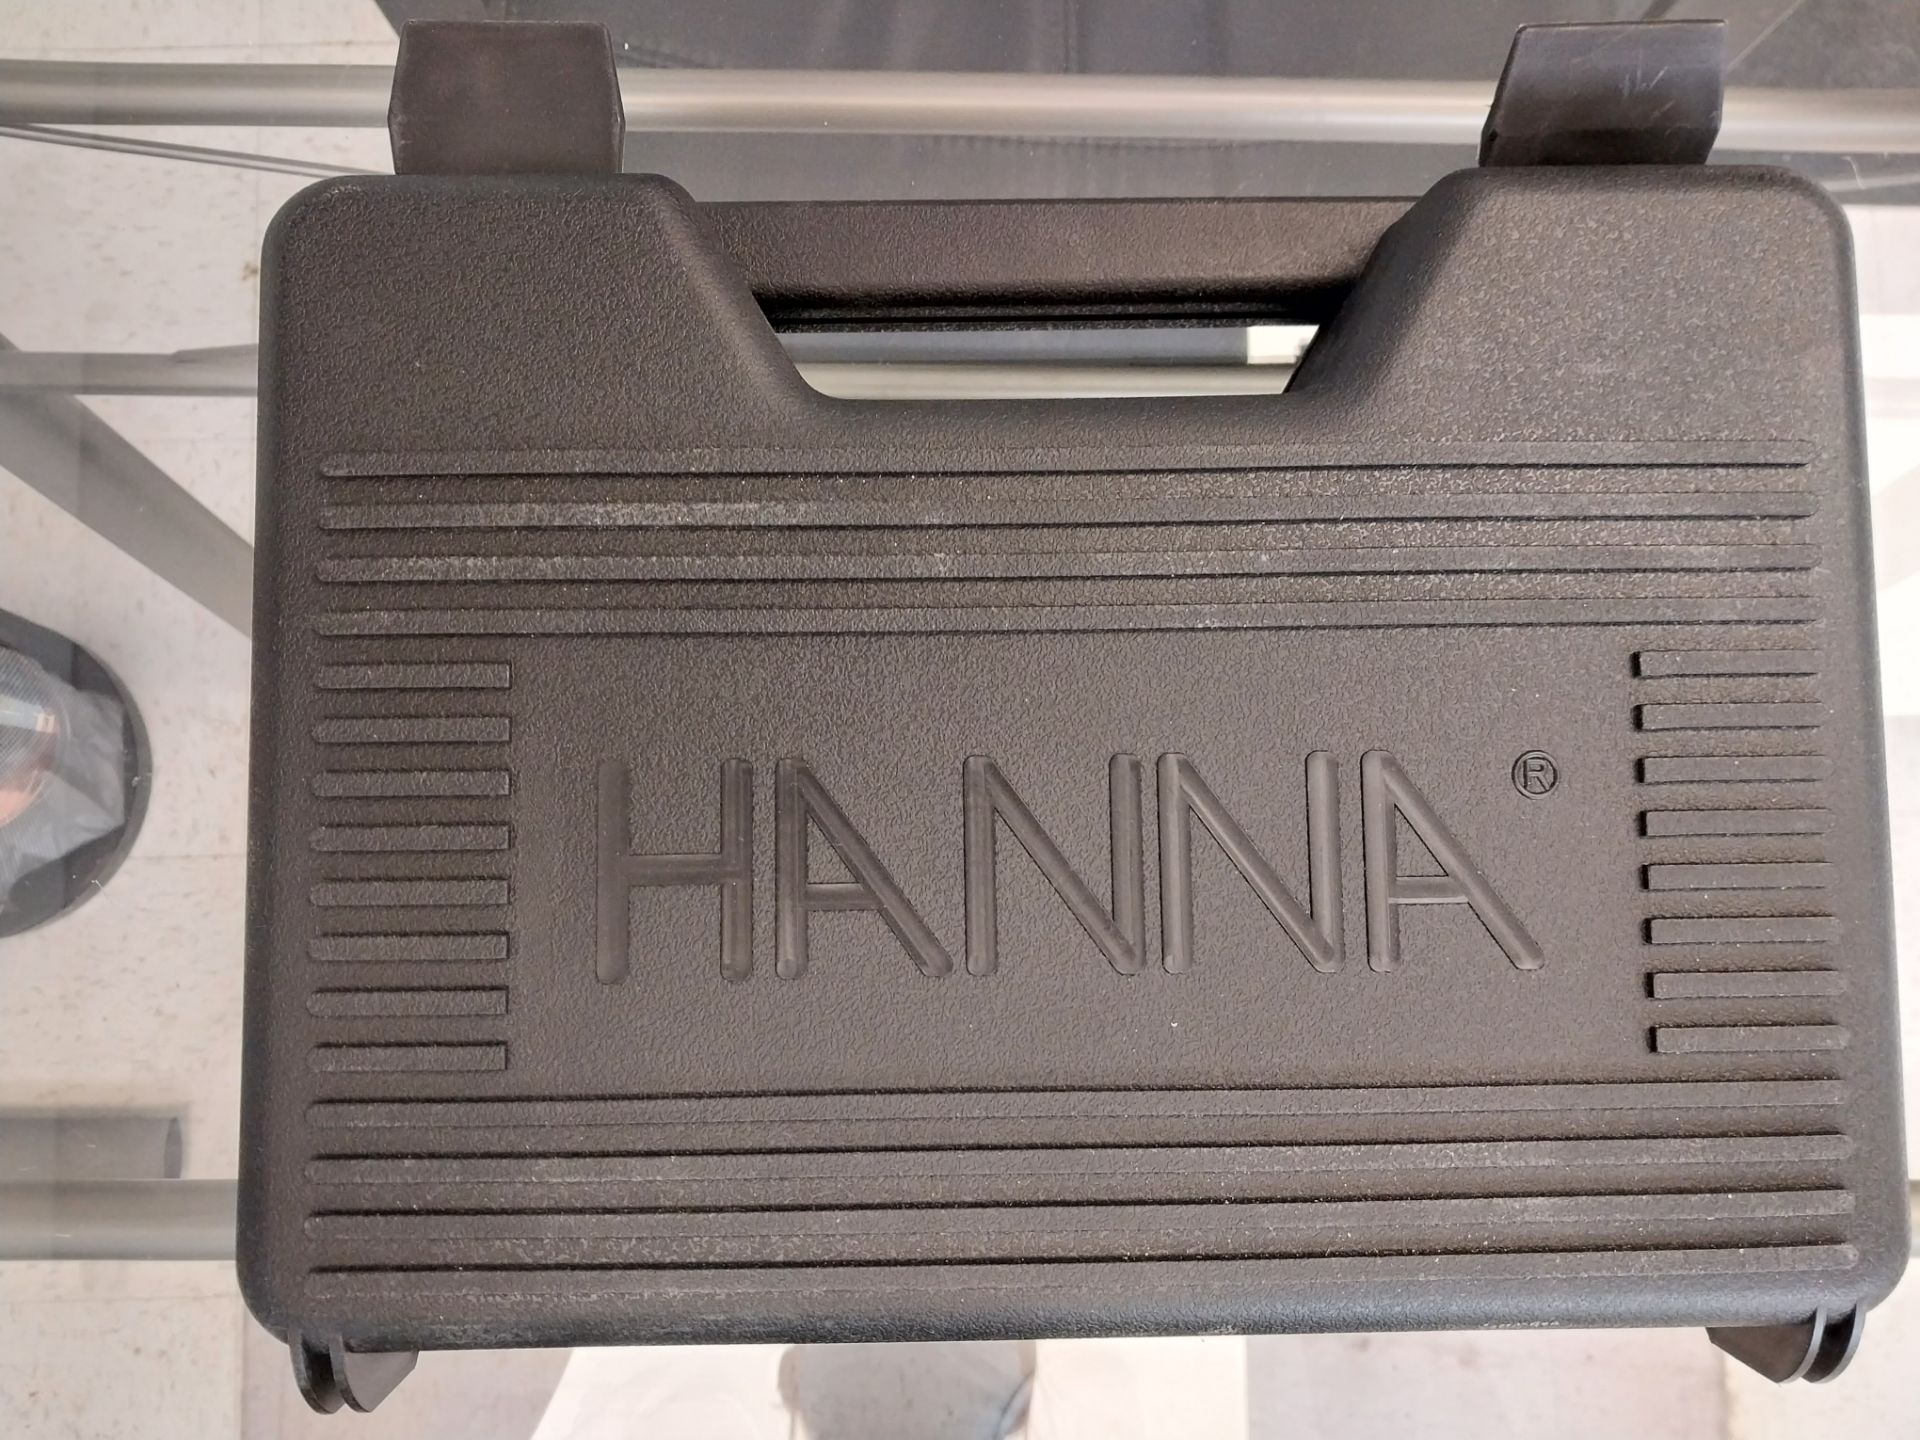 (Located in Denver, CO) Hanna Meter - New - but opened Model HI9813-6 - Image 2 of 3